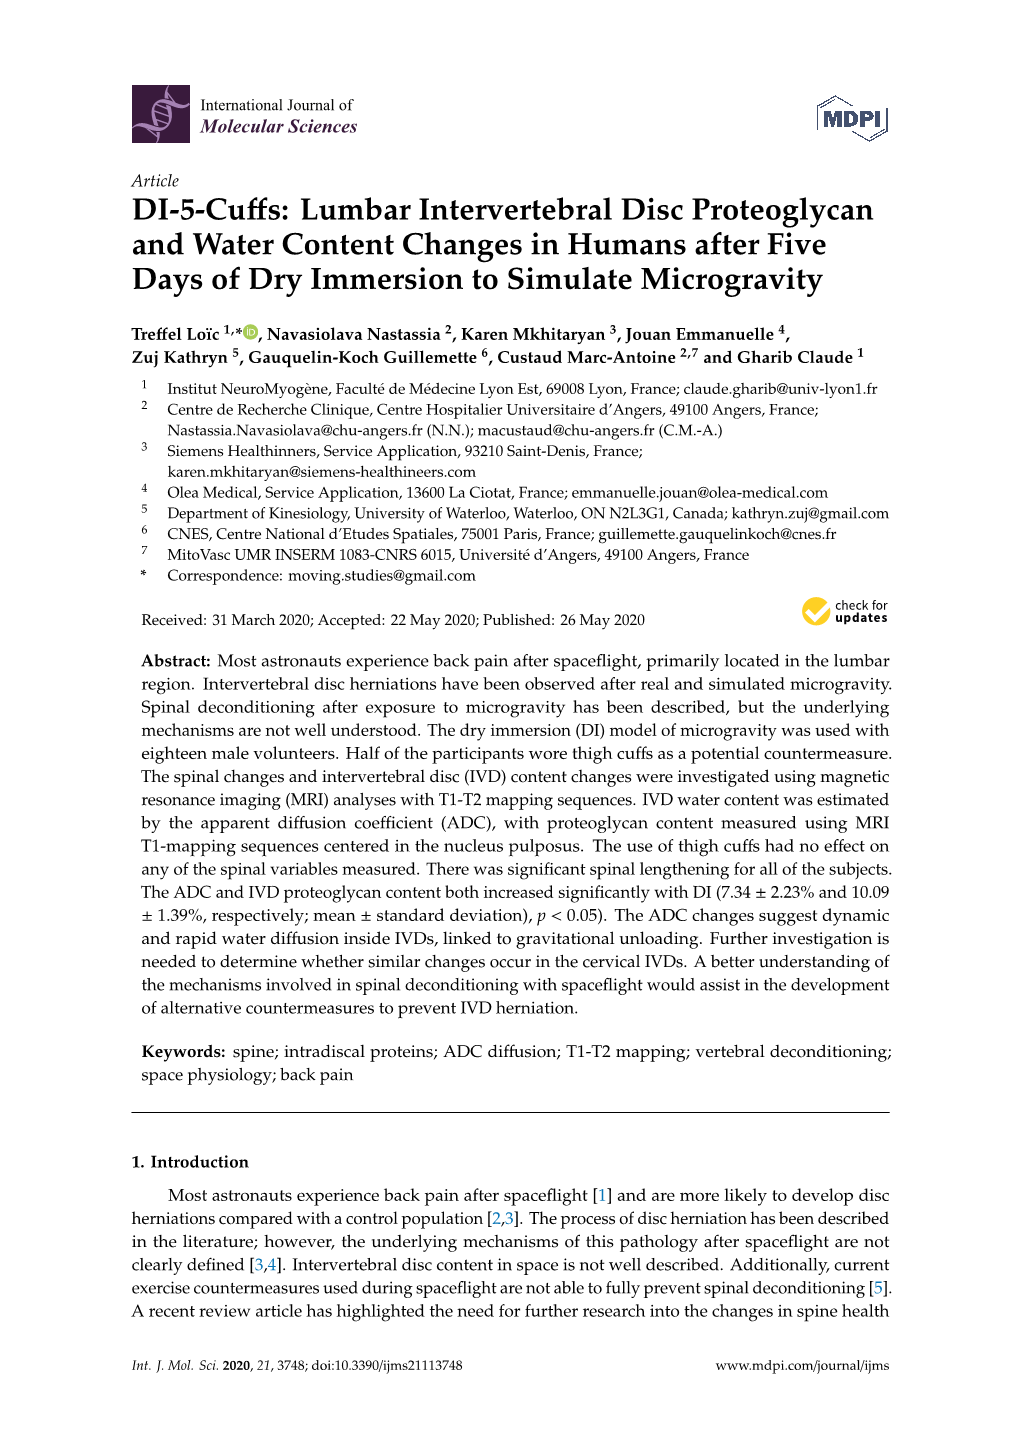 Lumbar Intervertebral Disc Proteoglycan and Water Content Changes in Humans After Five Days of Dry Immersion to Simulate Microgravity